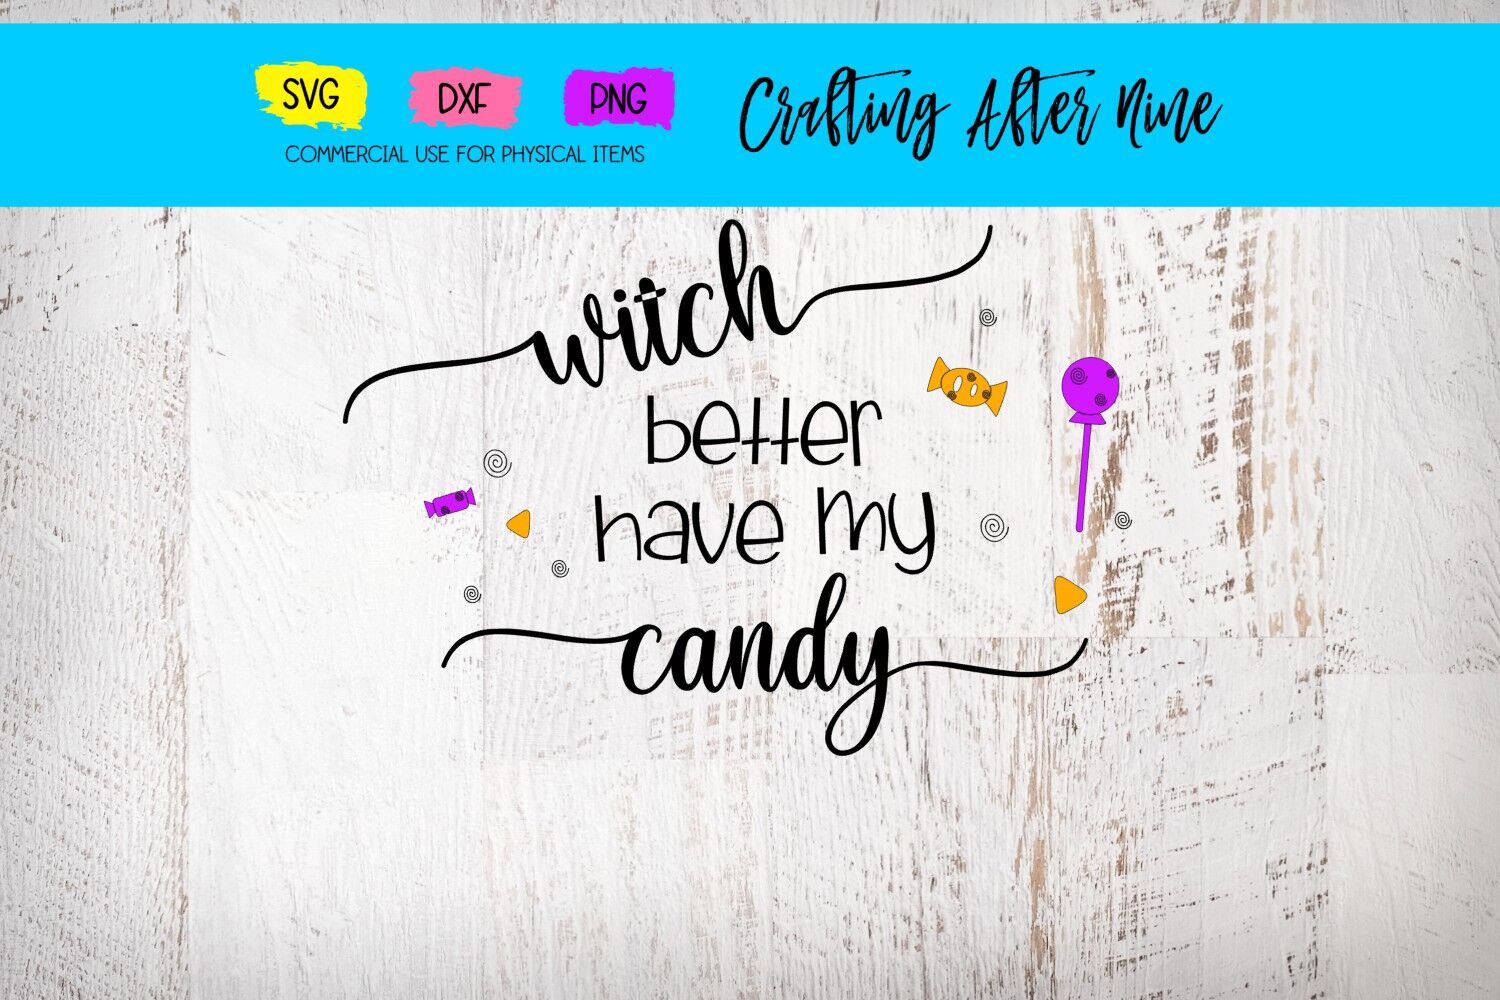 Witch Better Have My Candy Trick Or Treat My First Halloween Spooky Bat Spider Web Pumpkin Svg Dxf Png Ghost Haunted Wicked Witch By Crafting After Nine Thehungryjpeg Com